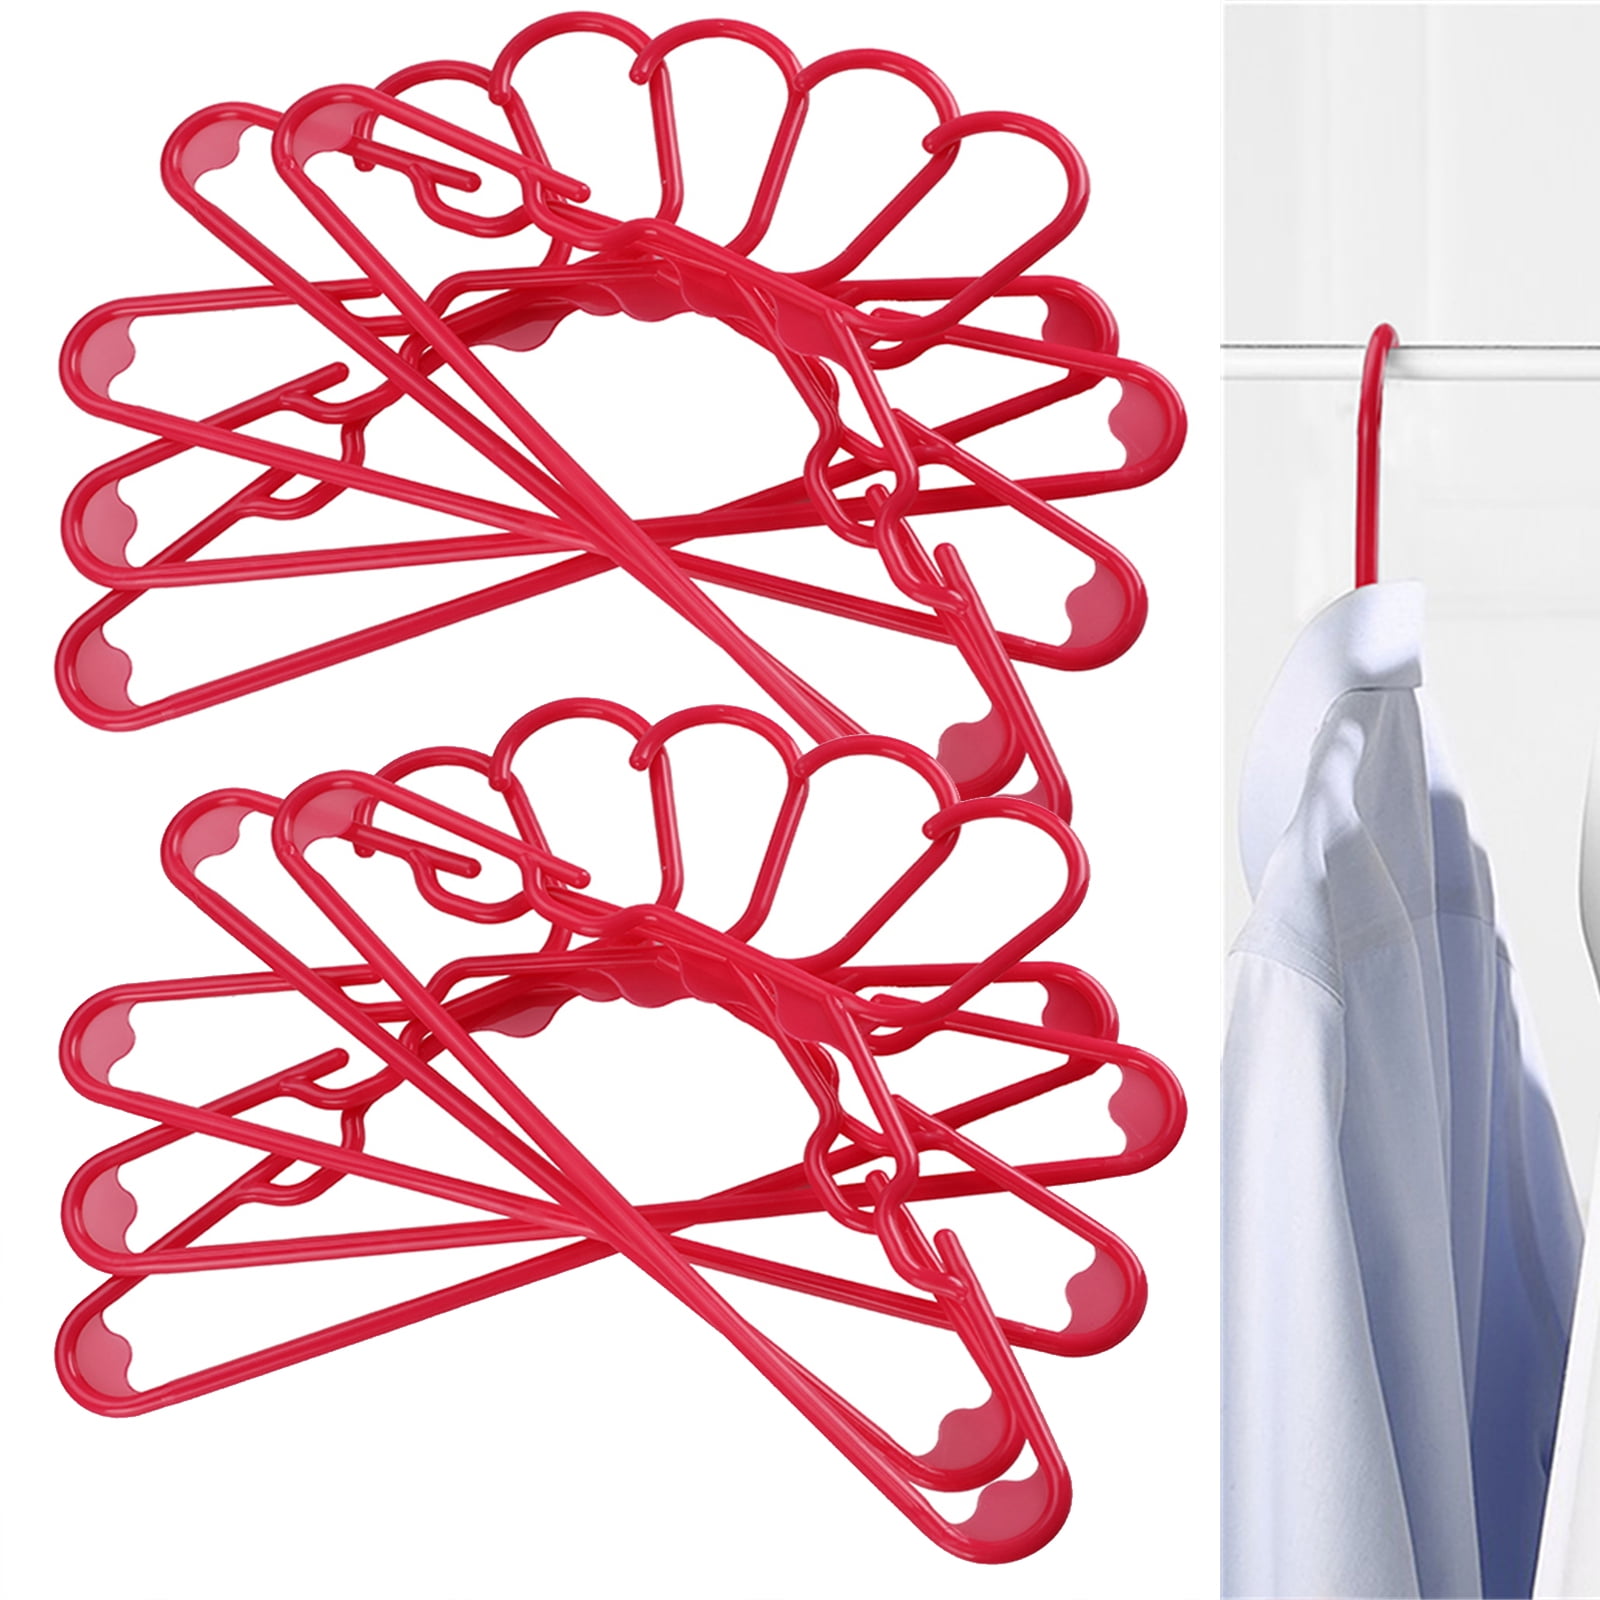  Baby Hangers 100 Pack Clothes Hangers Colorful Plastic Hangers  Small Coat Hangers for Kids,Infant,Nursery,Toddler : Home & Kitchen